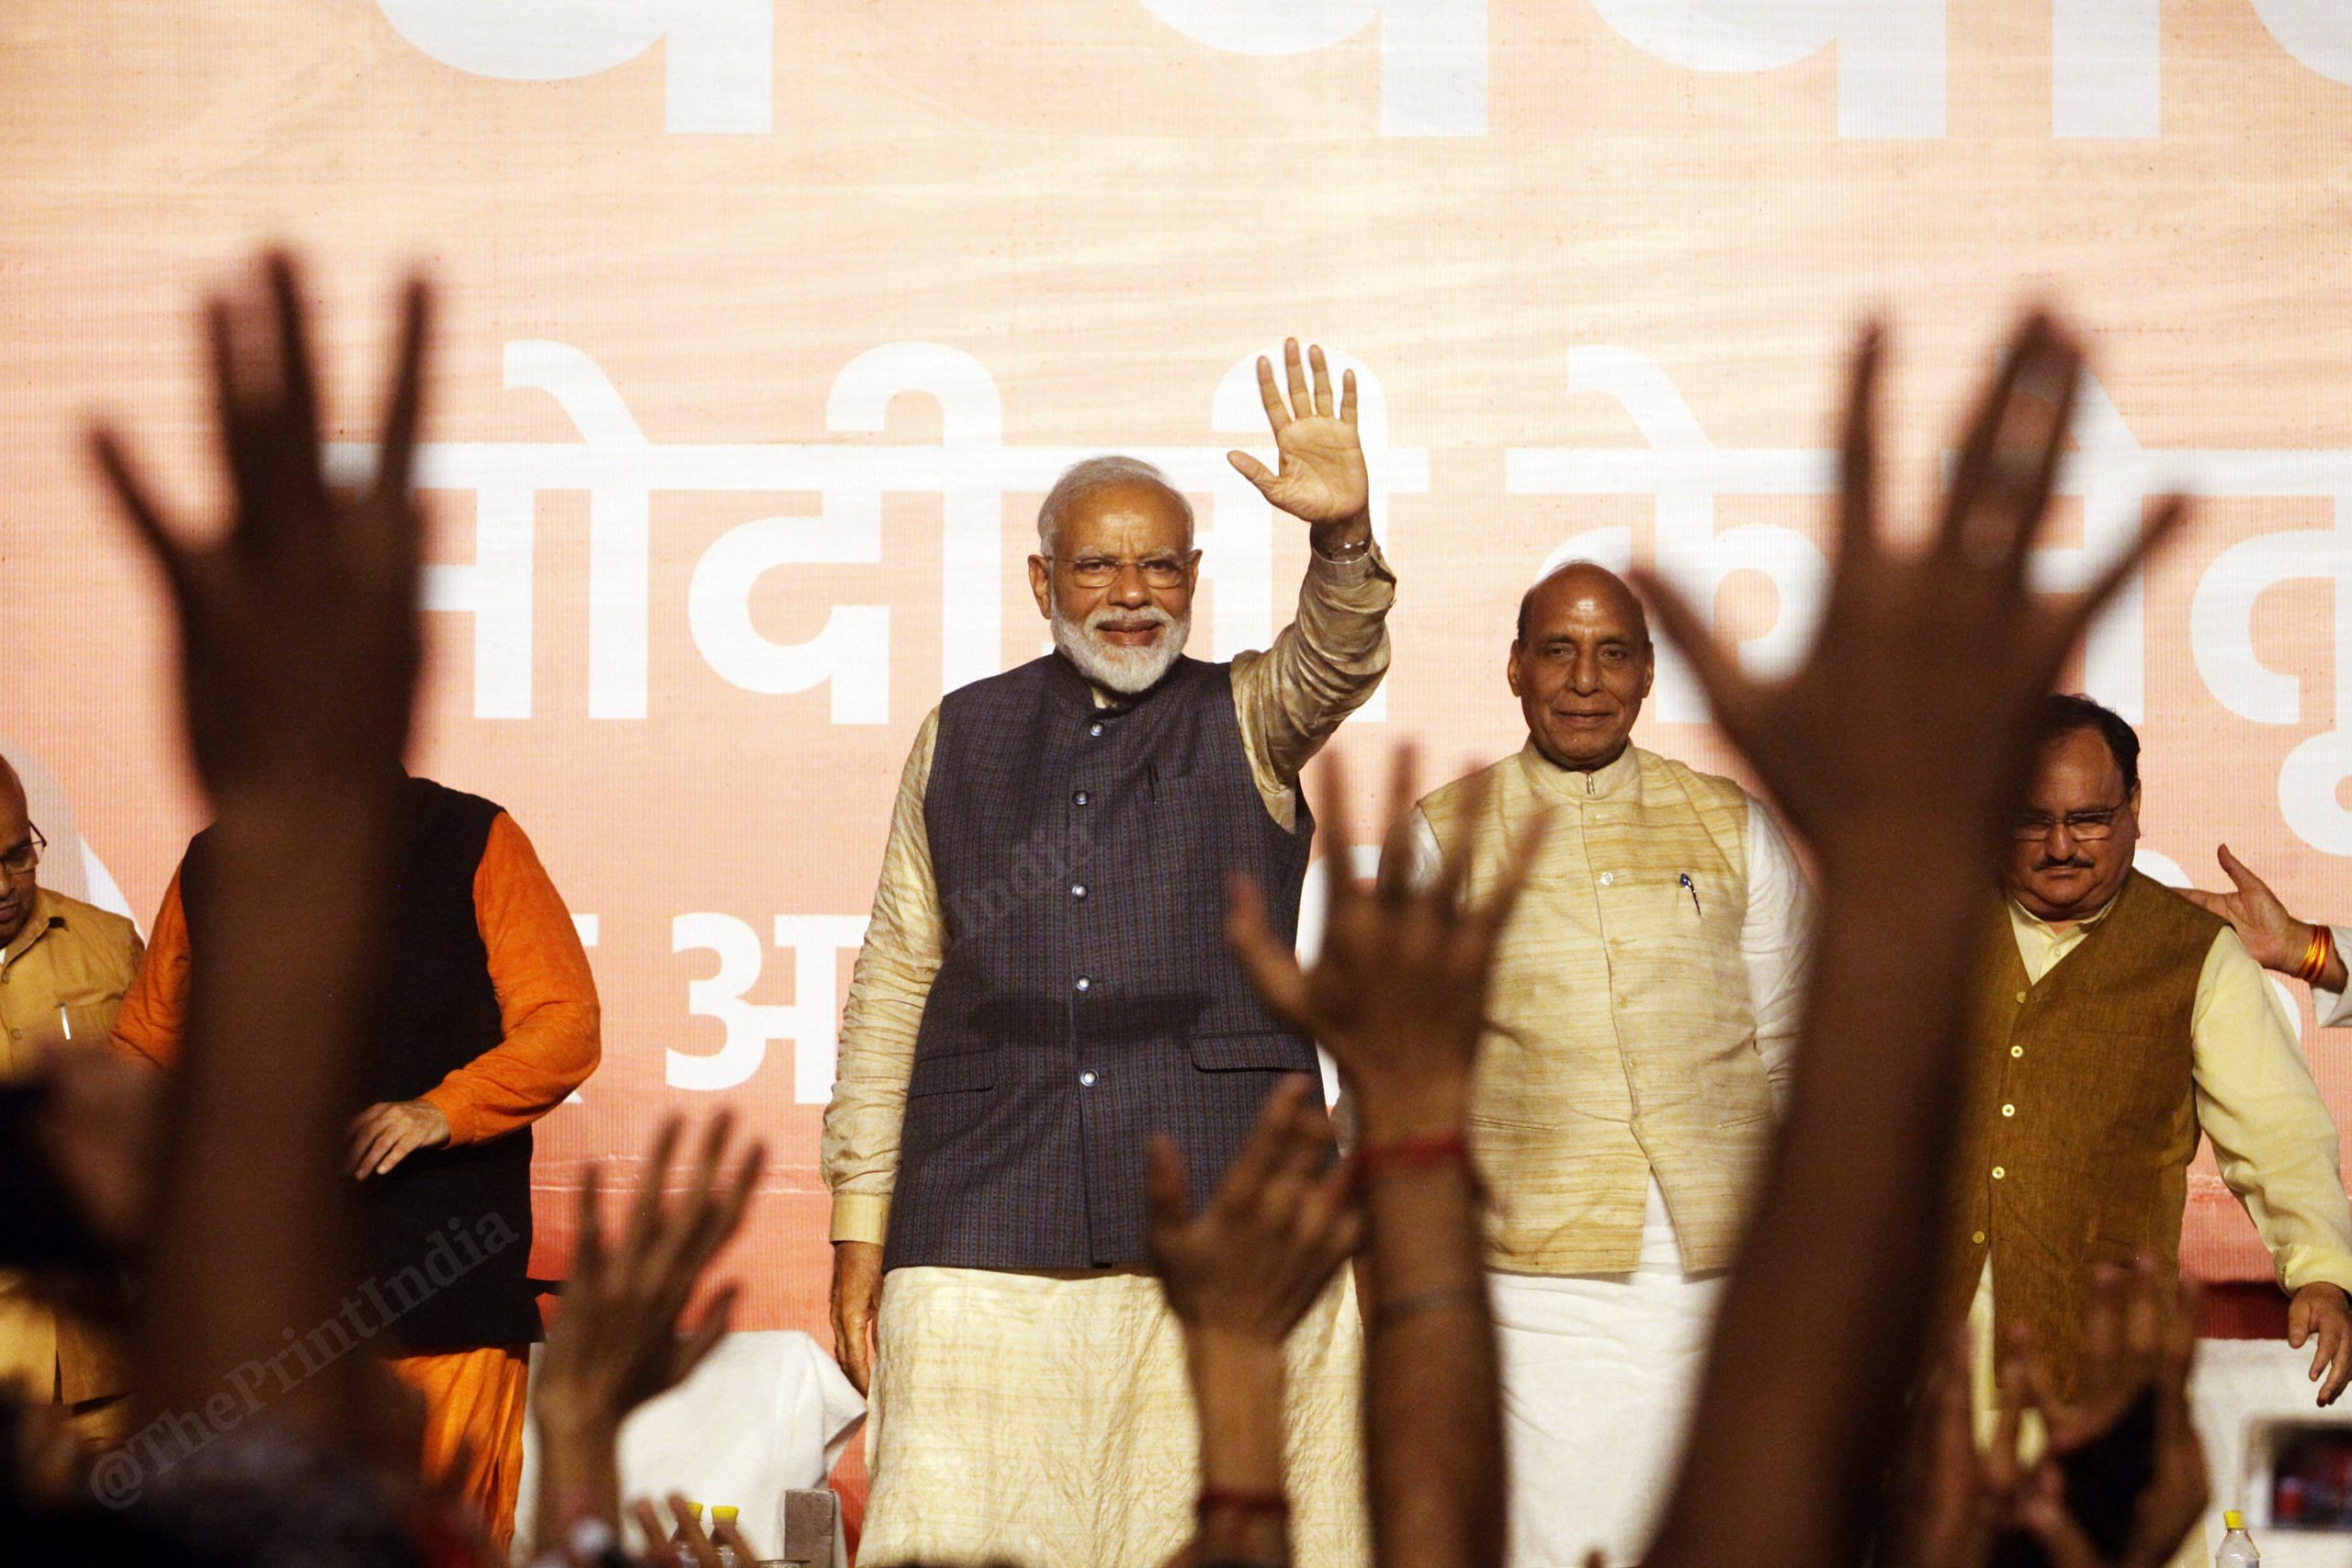 Narendra Modi addressed BJP party workers at the headquarter after winning Lok Sabha elections in 2019 | Photo: Praveen Jain | ThePrint